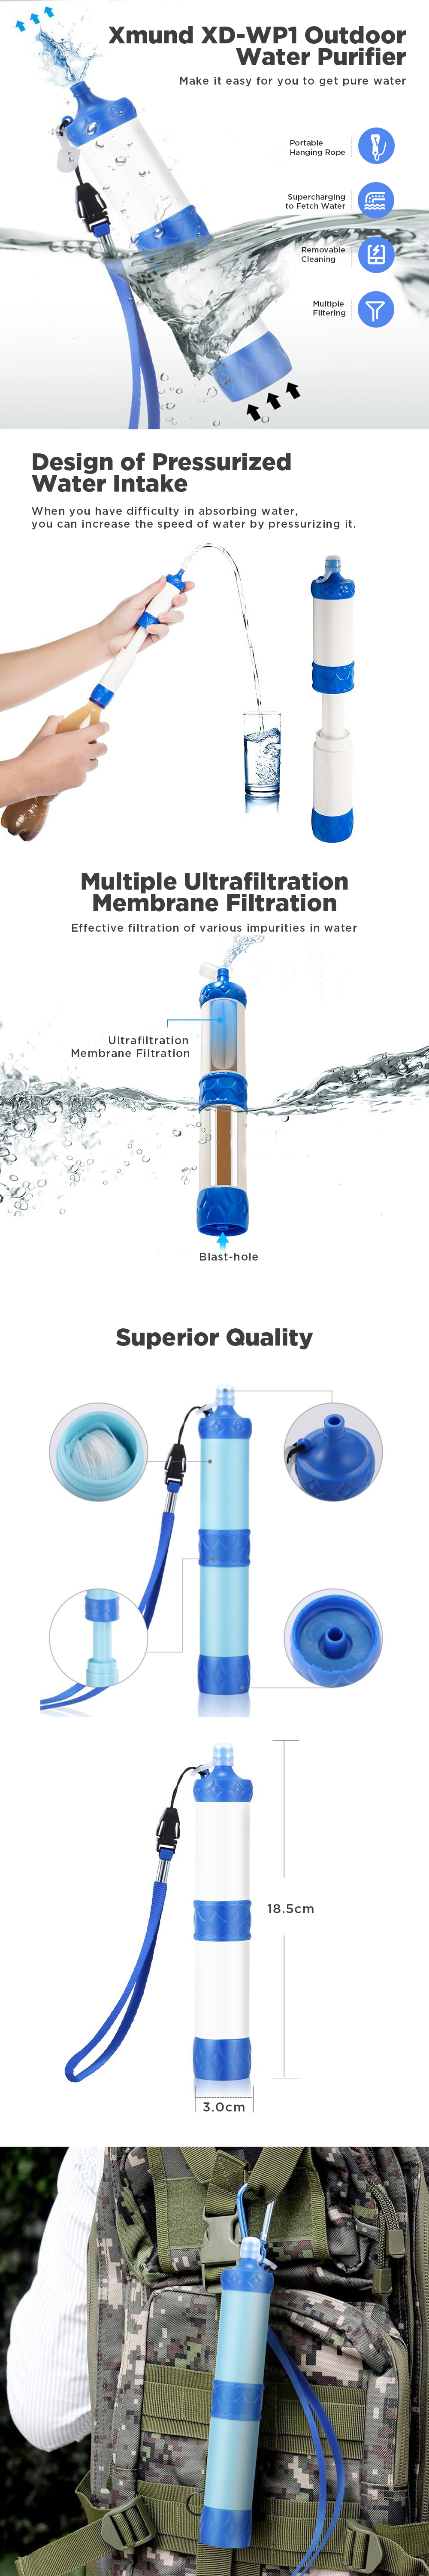 1000L-Water-Filter-Portable-Purifier-Cleaner-Emergency-Camping-Travel-Safety-Survival-Hydration-Drin-1512055-1